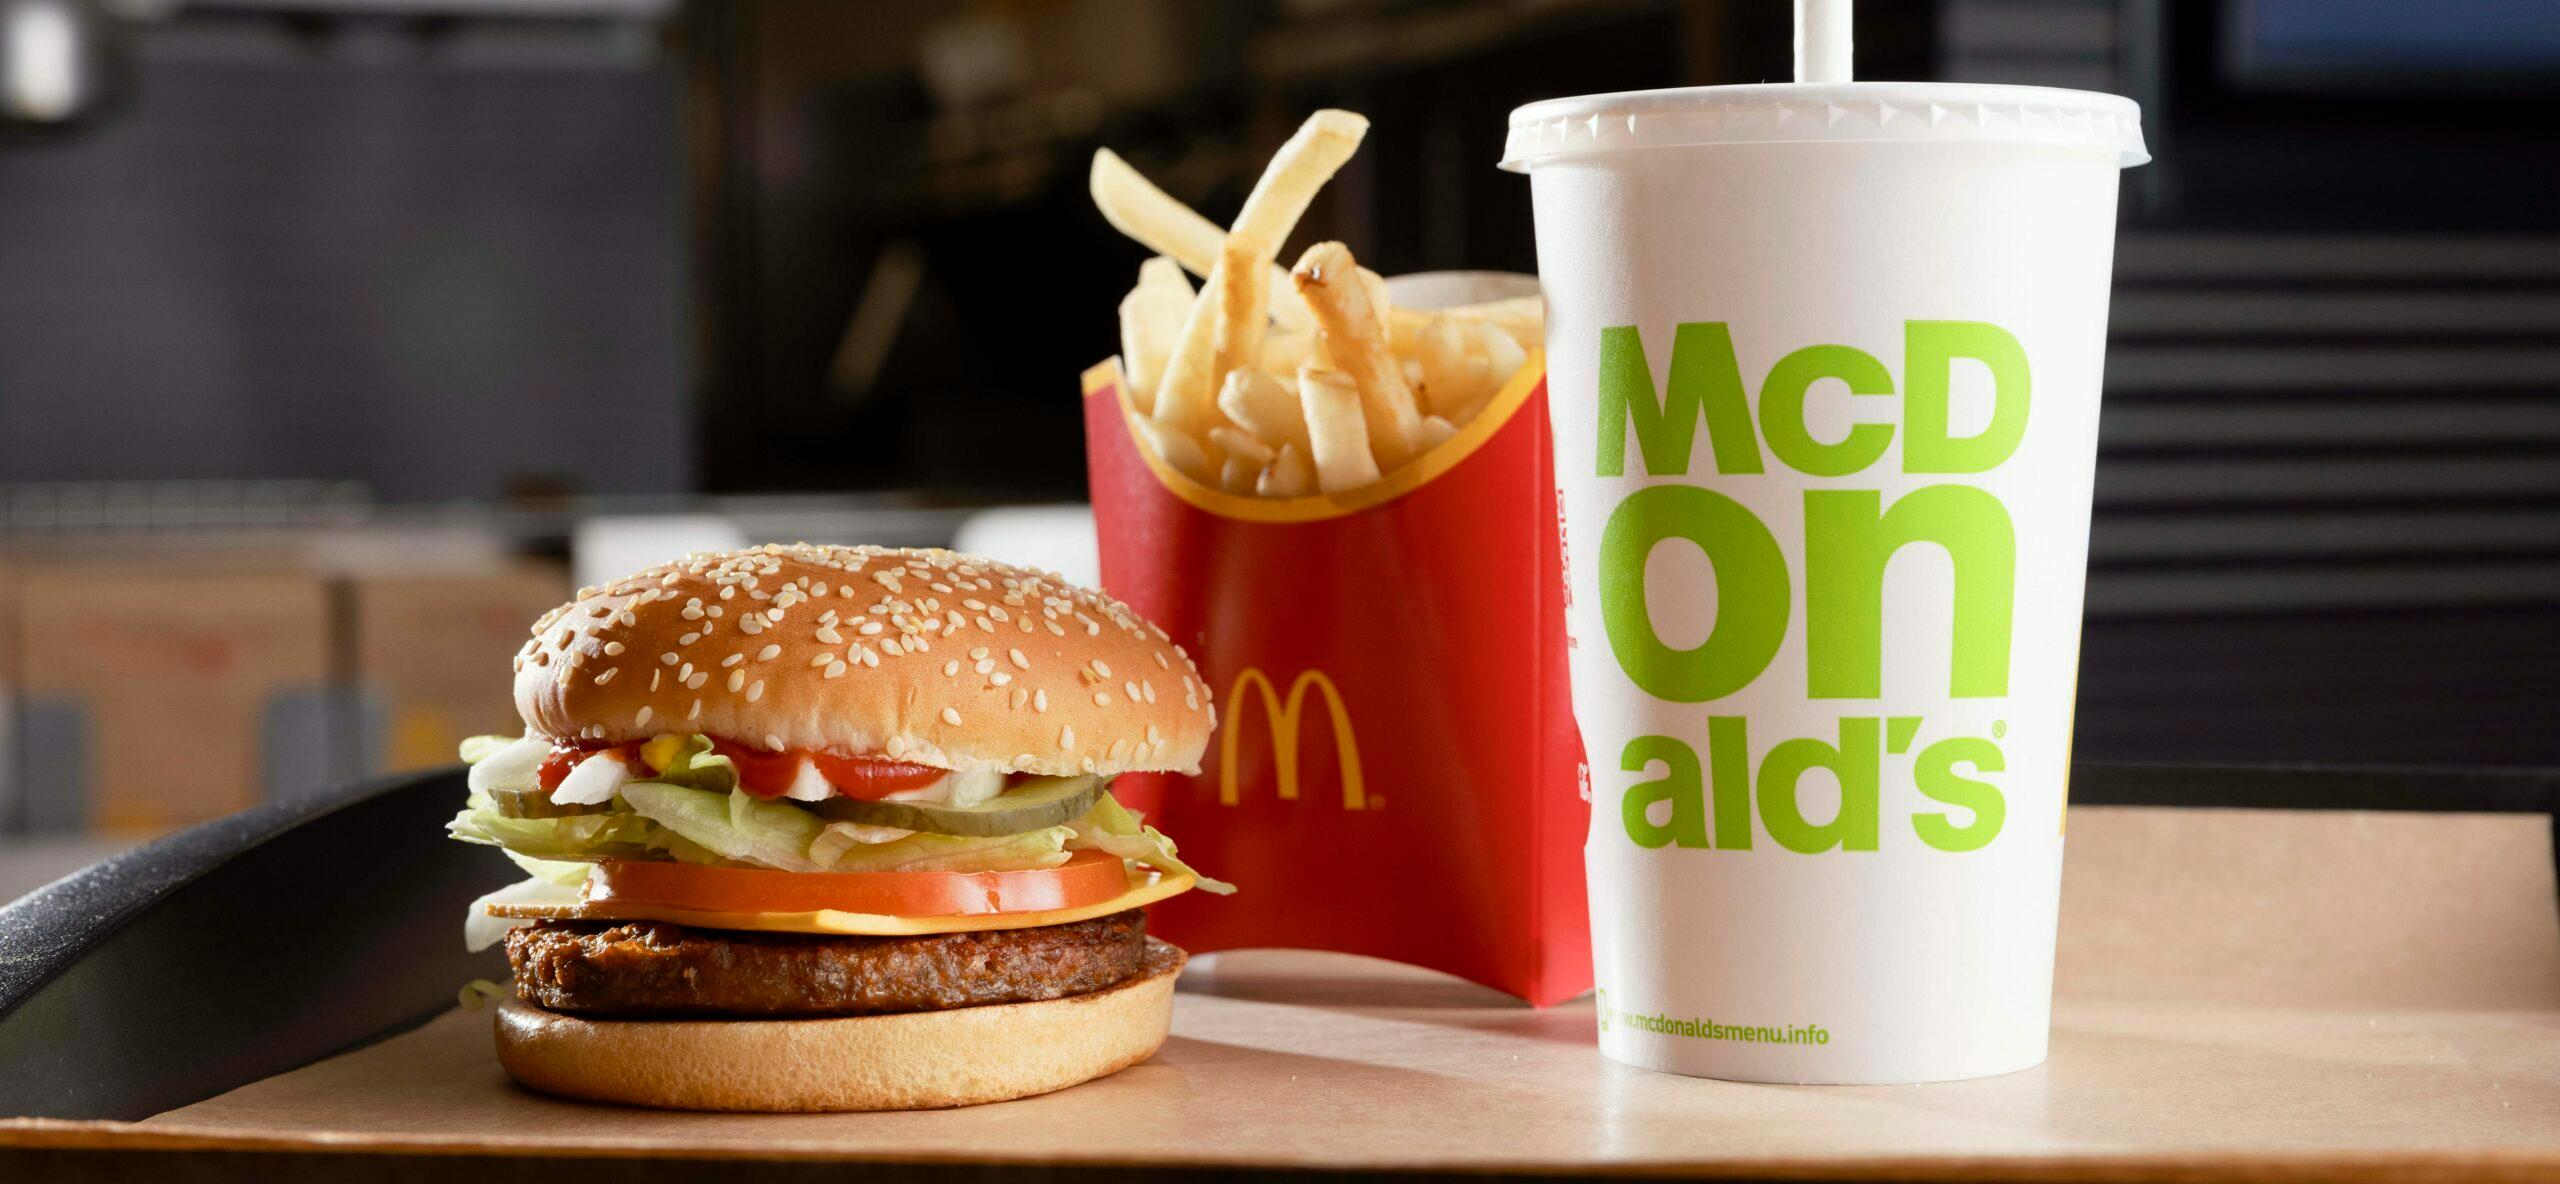 McDonald’s New Strawless Lids Are Sending Customers Into A Frenzy